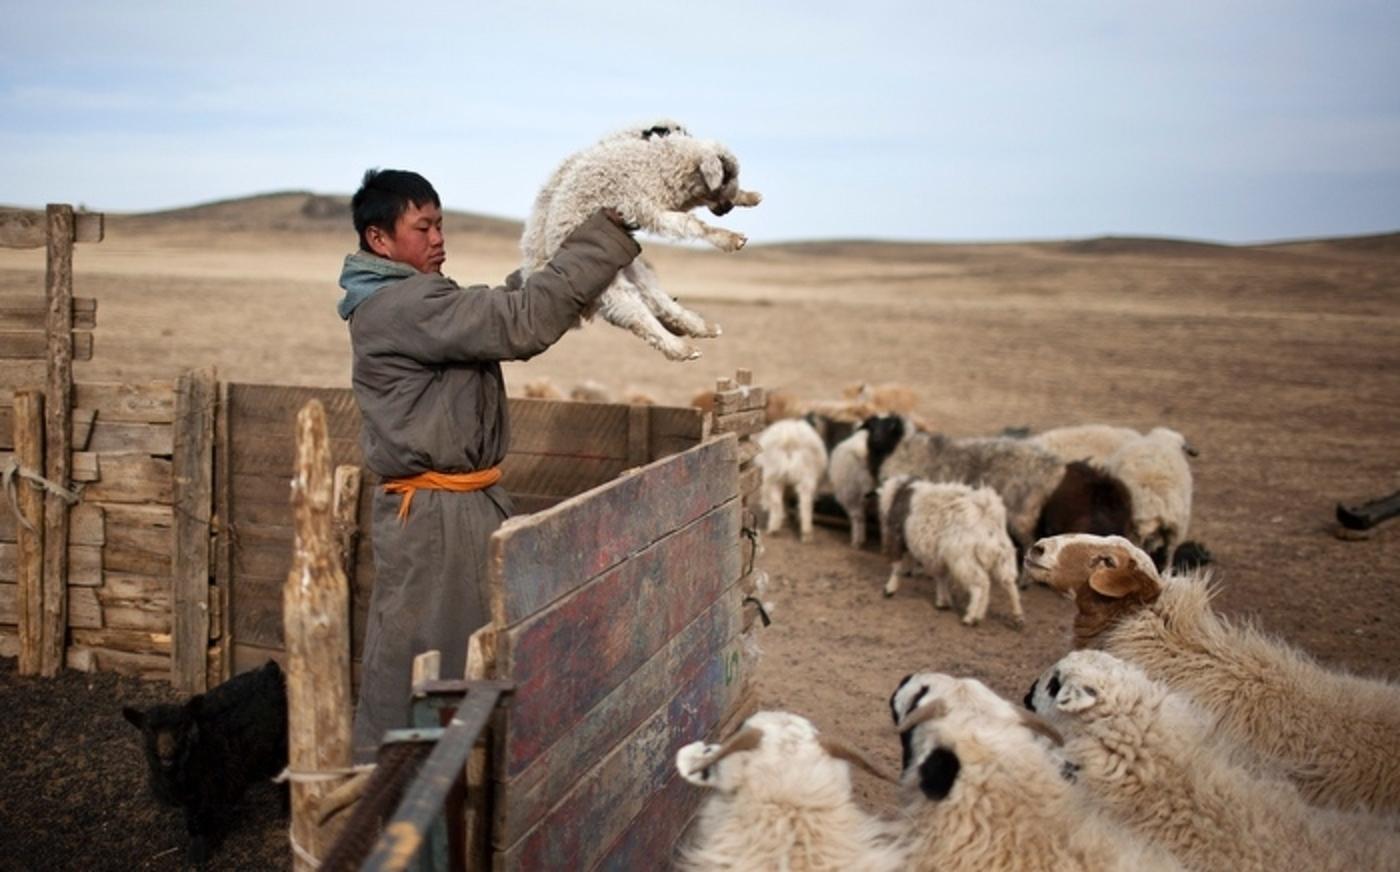 A young Mongolian goat herder tends to the flock of goats. Photo courtesy Wikimedia Commons/Taylor Weidman/The Vanishing Cultures Project (www.vcproject.org)